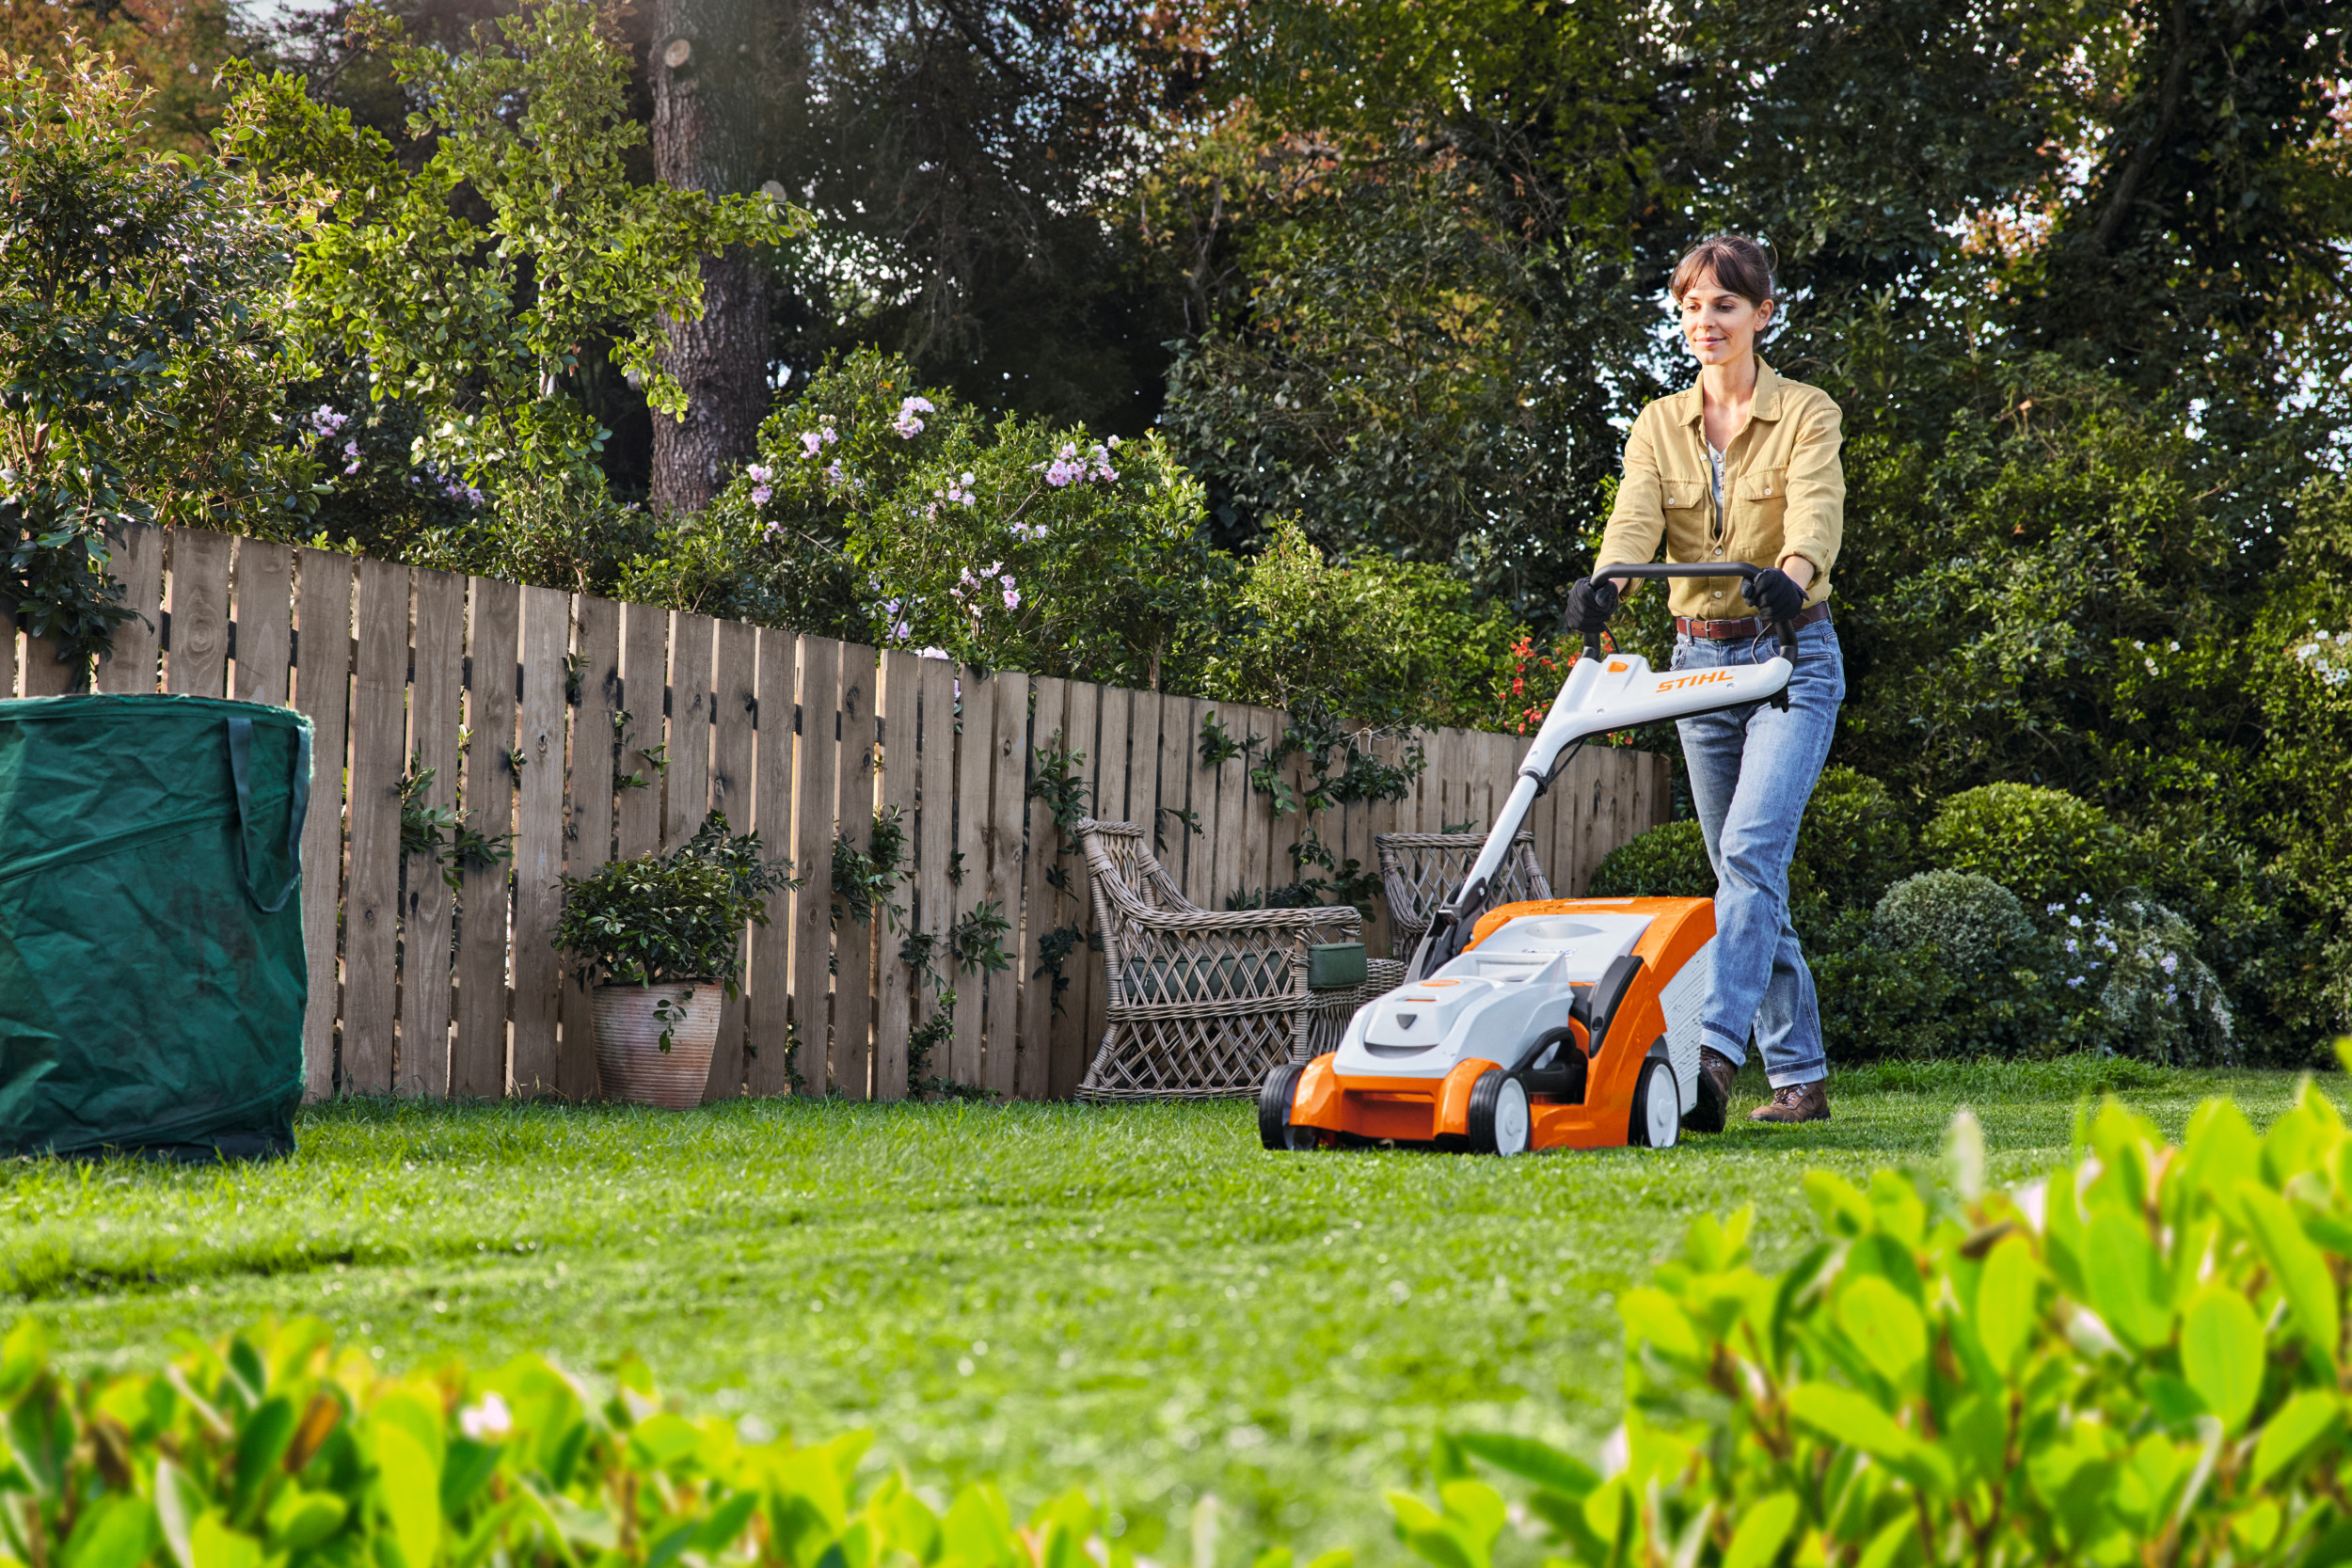 A woman is halfway through mowing her lawn using a STIHL RMA 239 C cordless lawn mower, in a garden surrounded by tall shrubs and plants